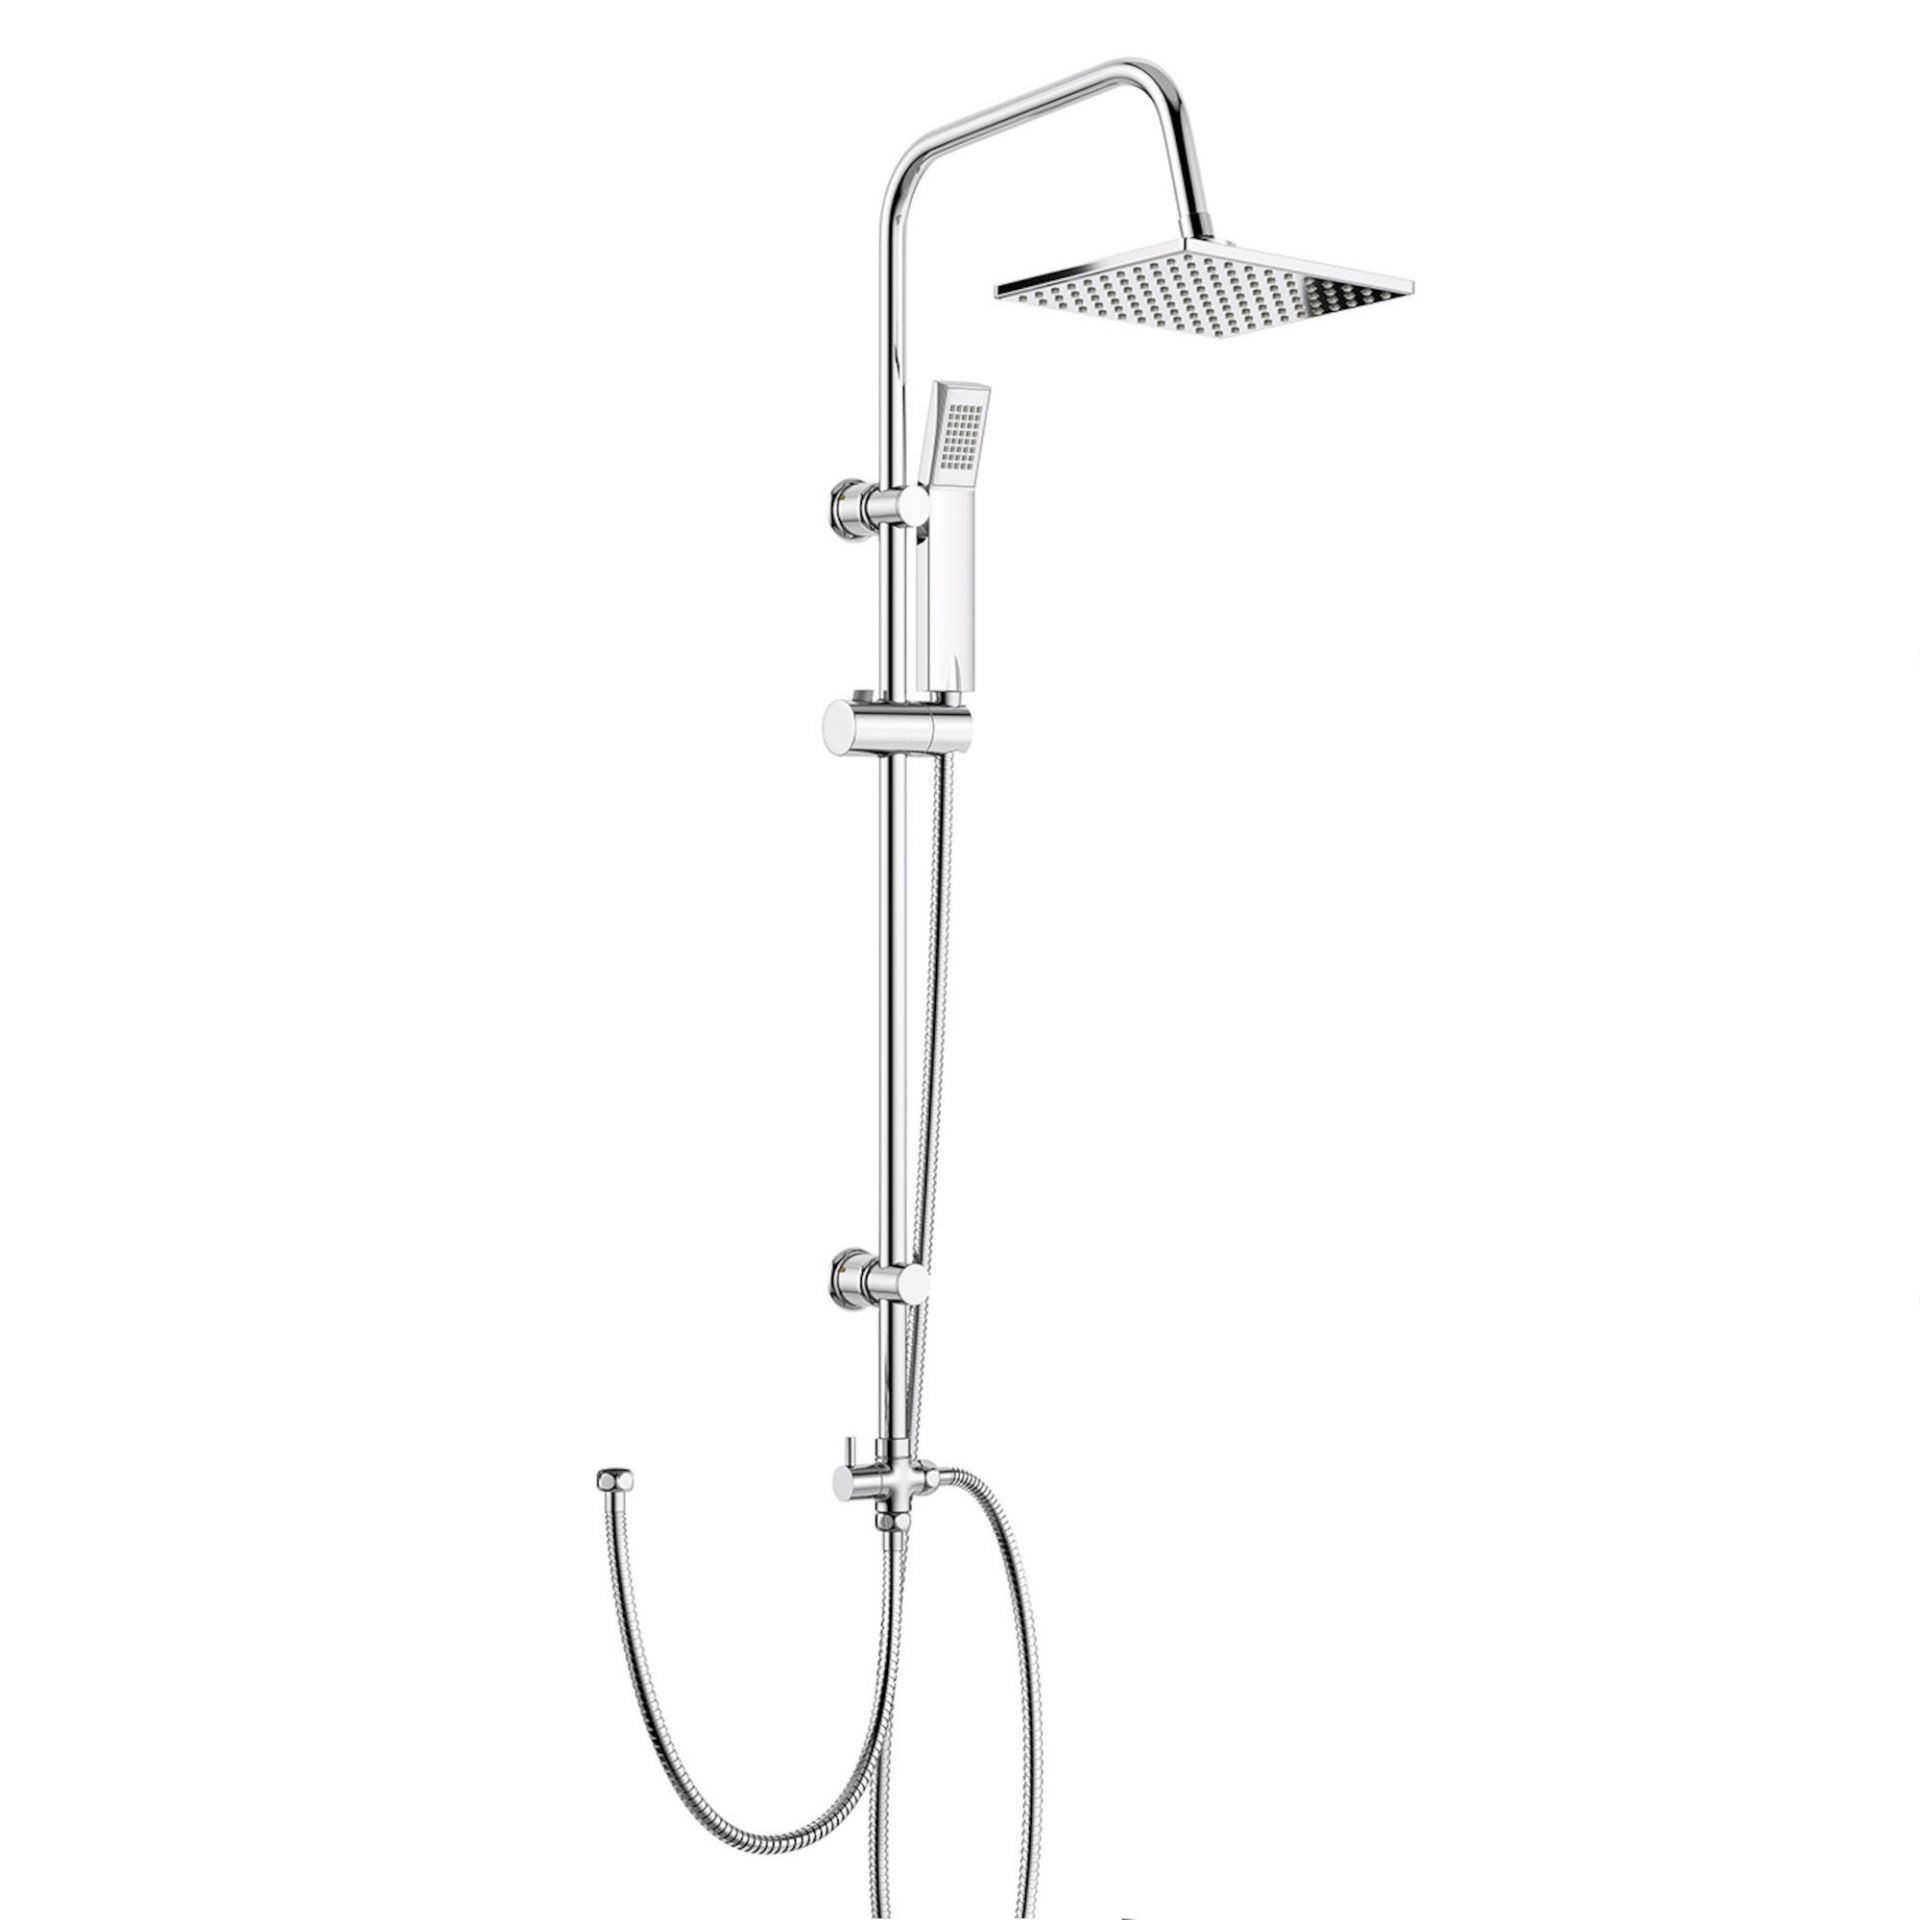 (DW237) 200mm Square Head, Riser Rail & Handheld Kit Quality stainless steel shower head with ... - Image 2 of 3